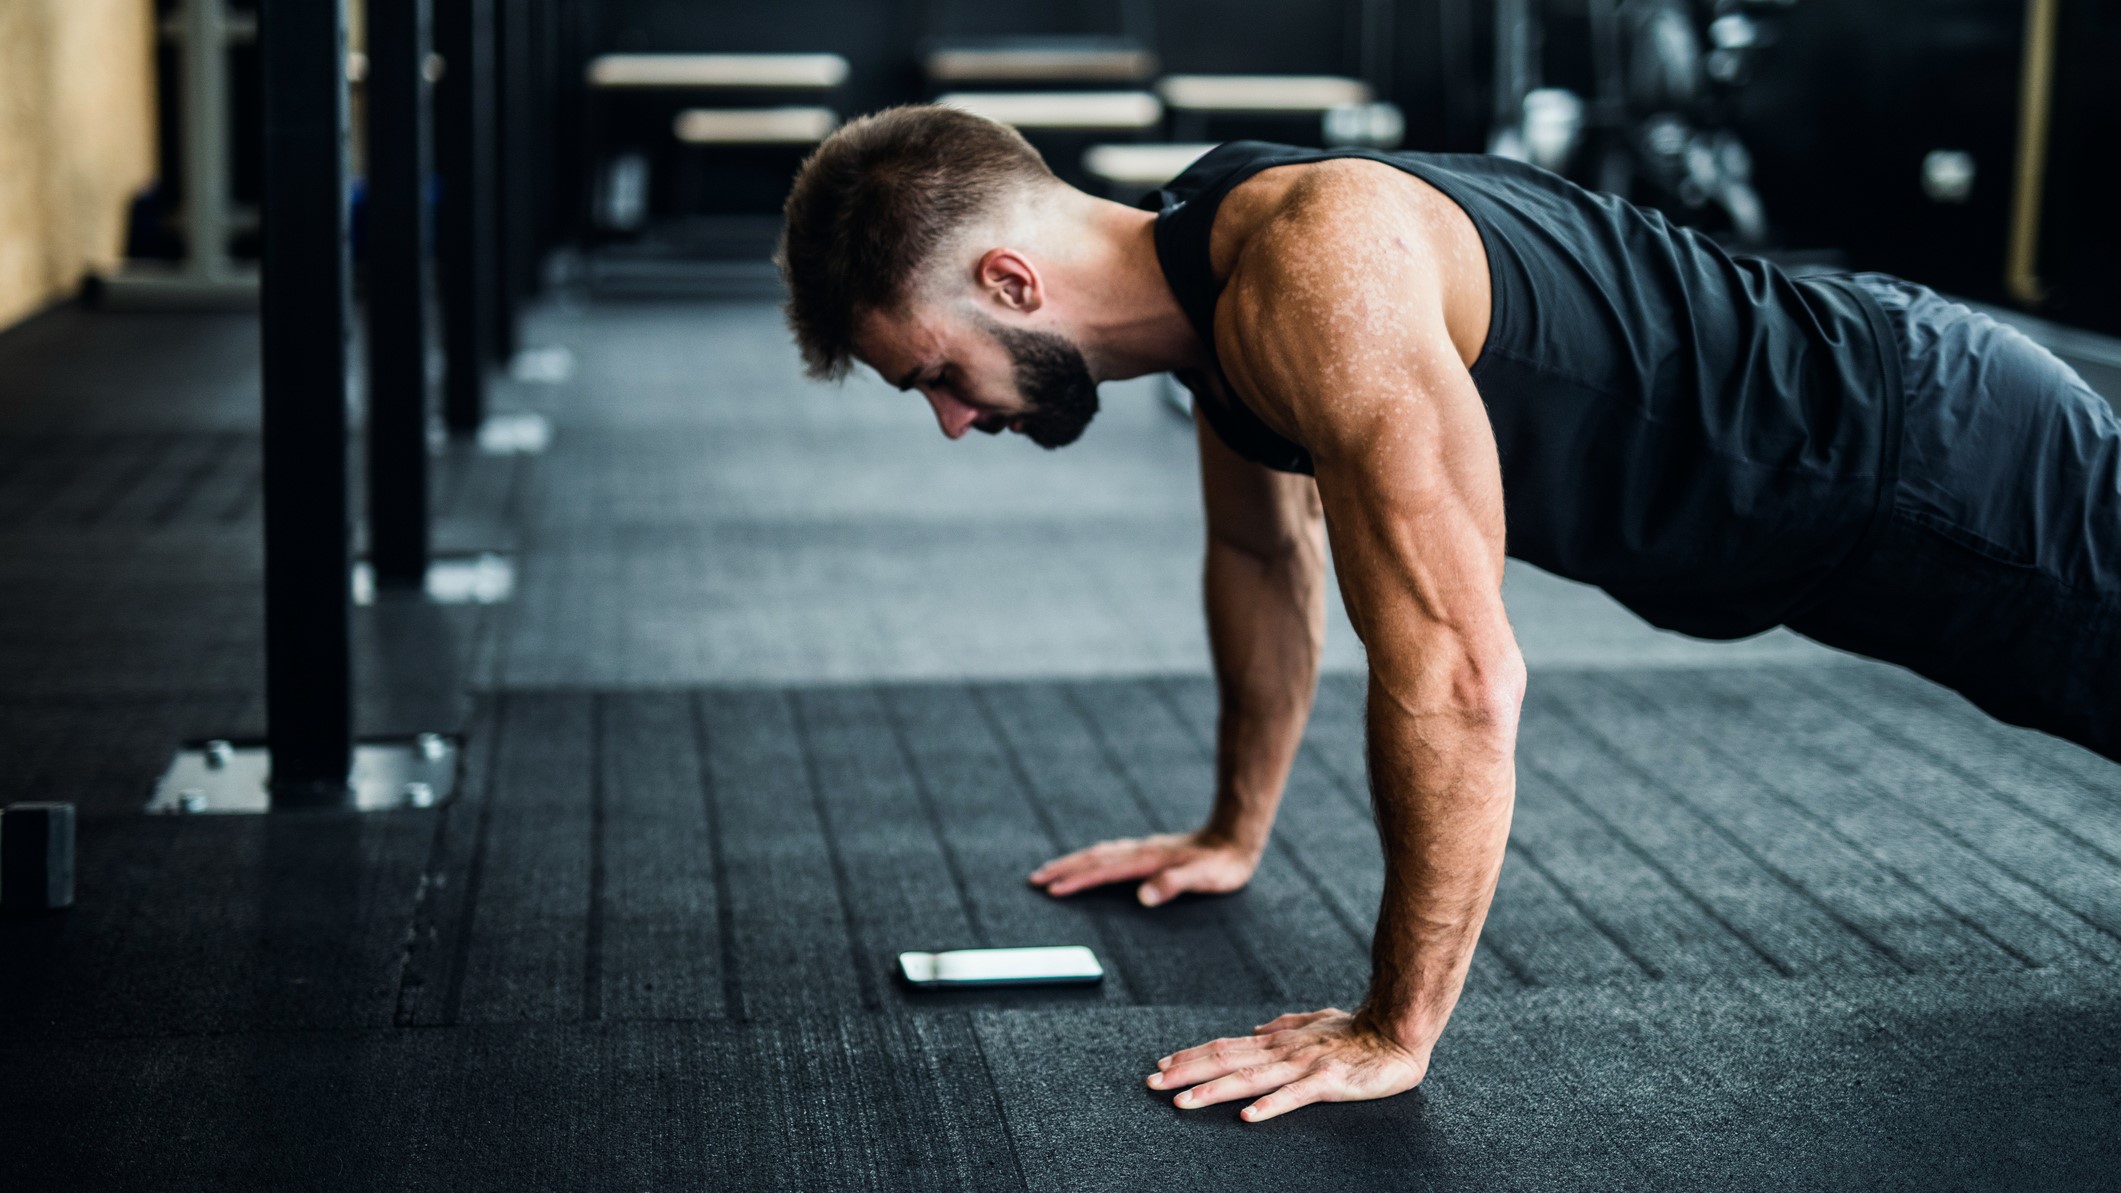 15 Gym & Fitness Marketing Ideas To Grow Your Business (2019)